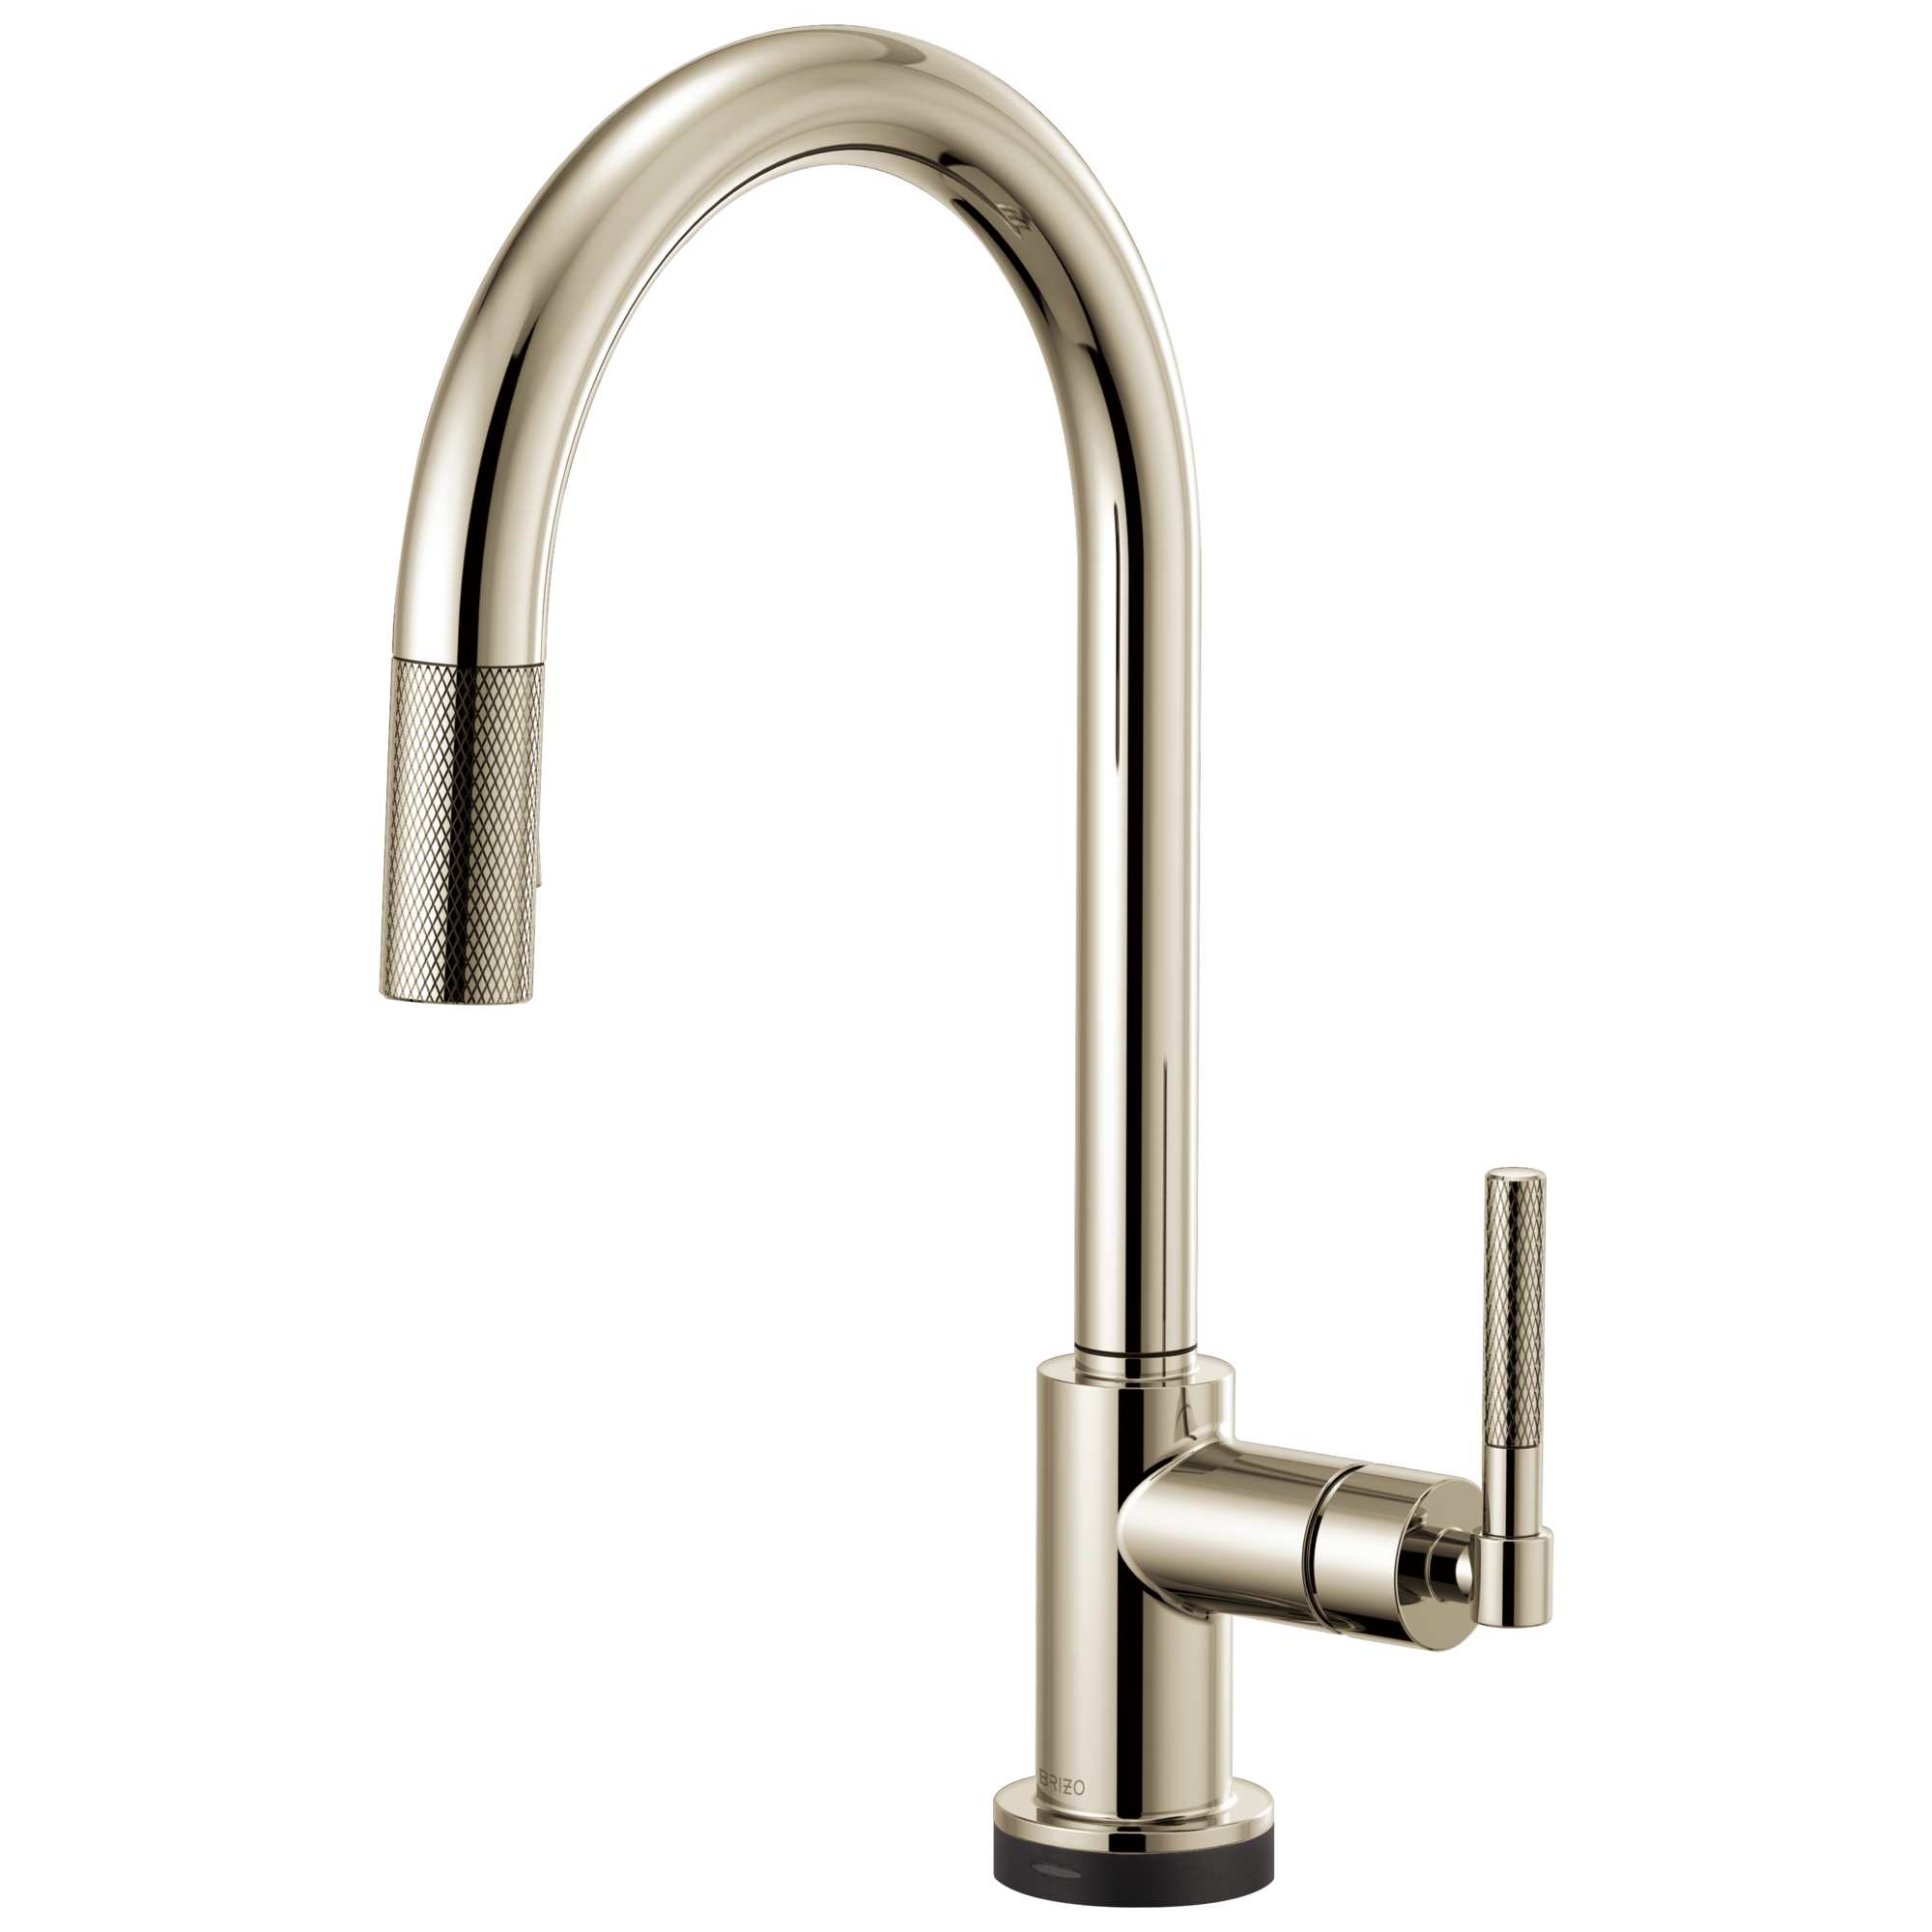 Brizo Litze: SmartTouch Pull-Down Faucet with Arc Spout and Knurled Handle